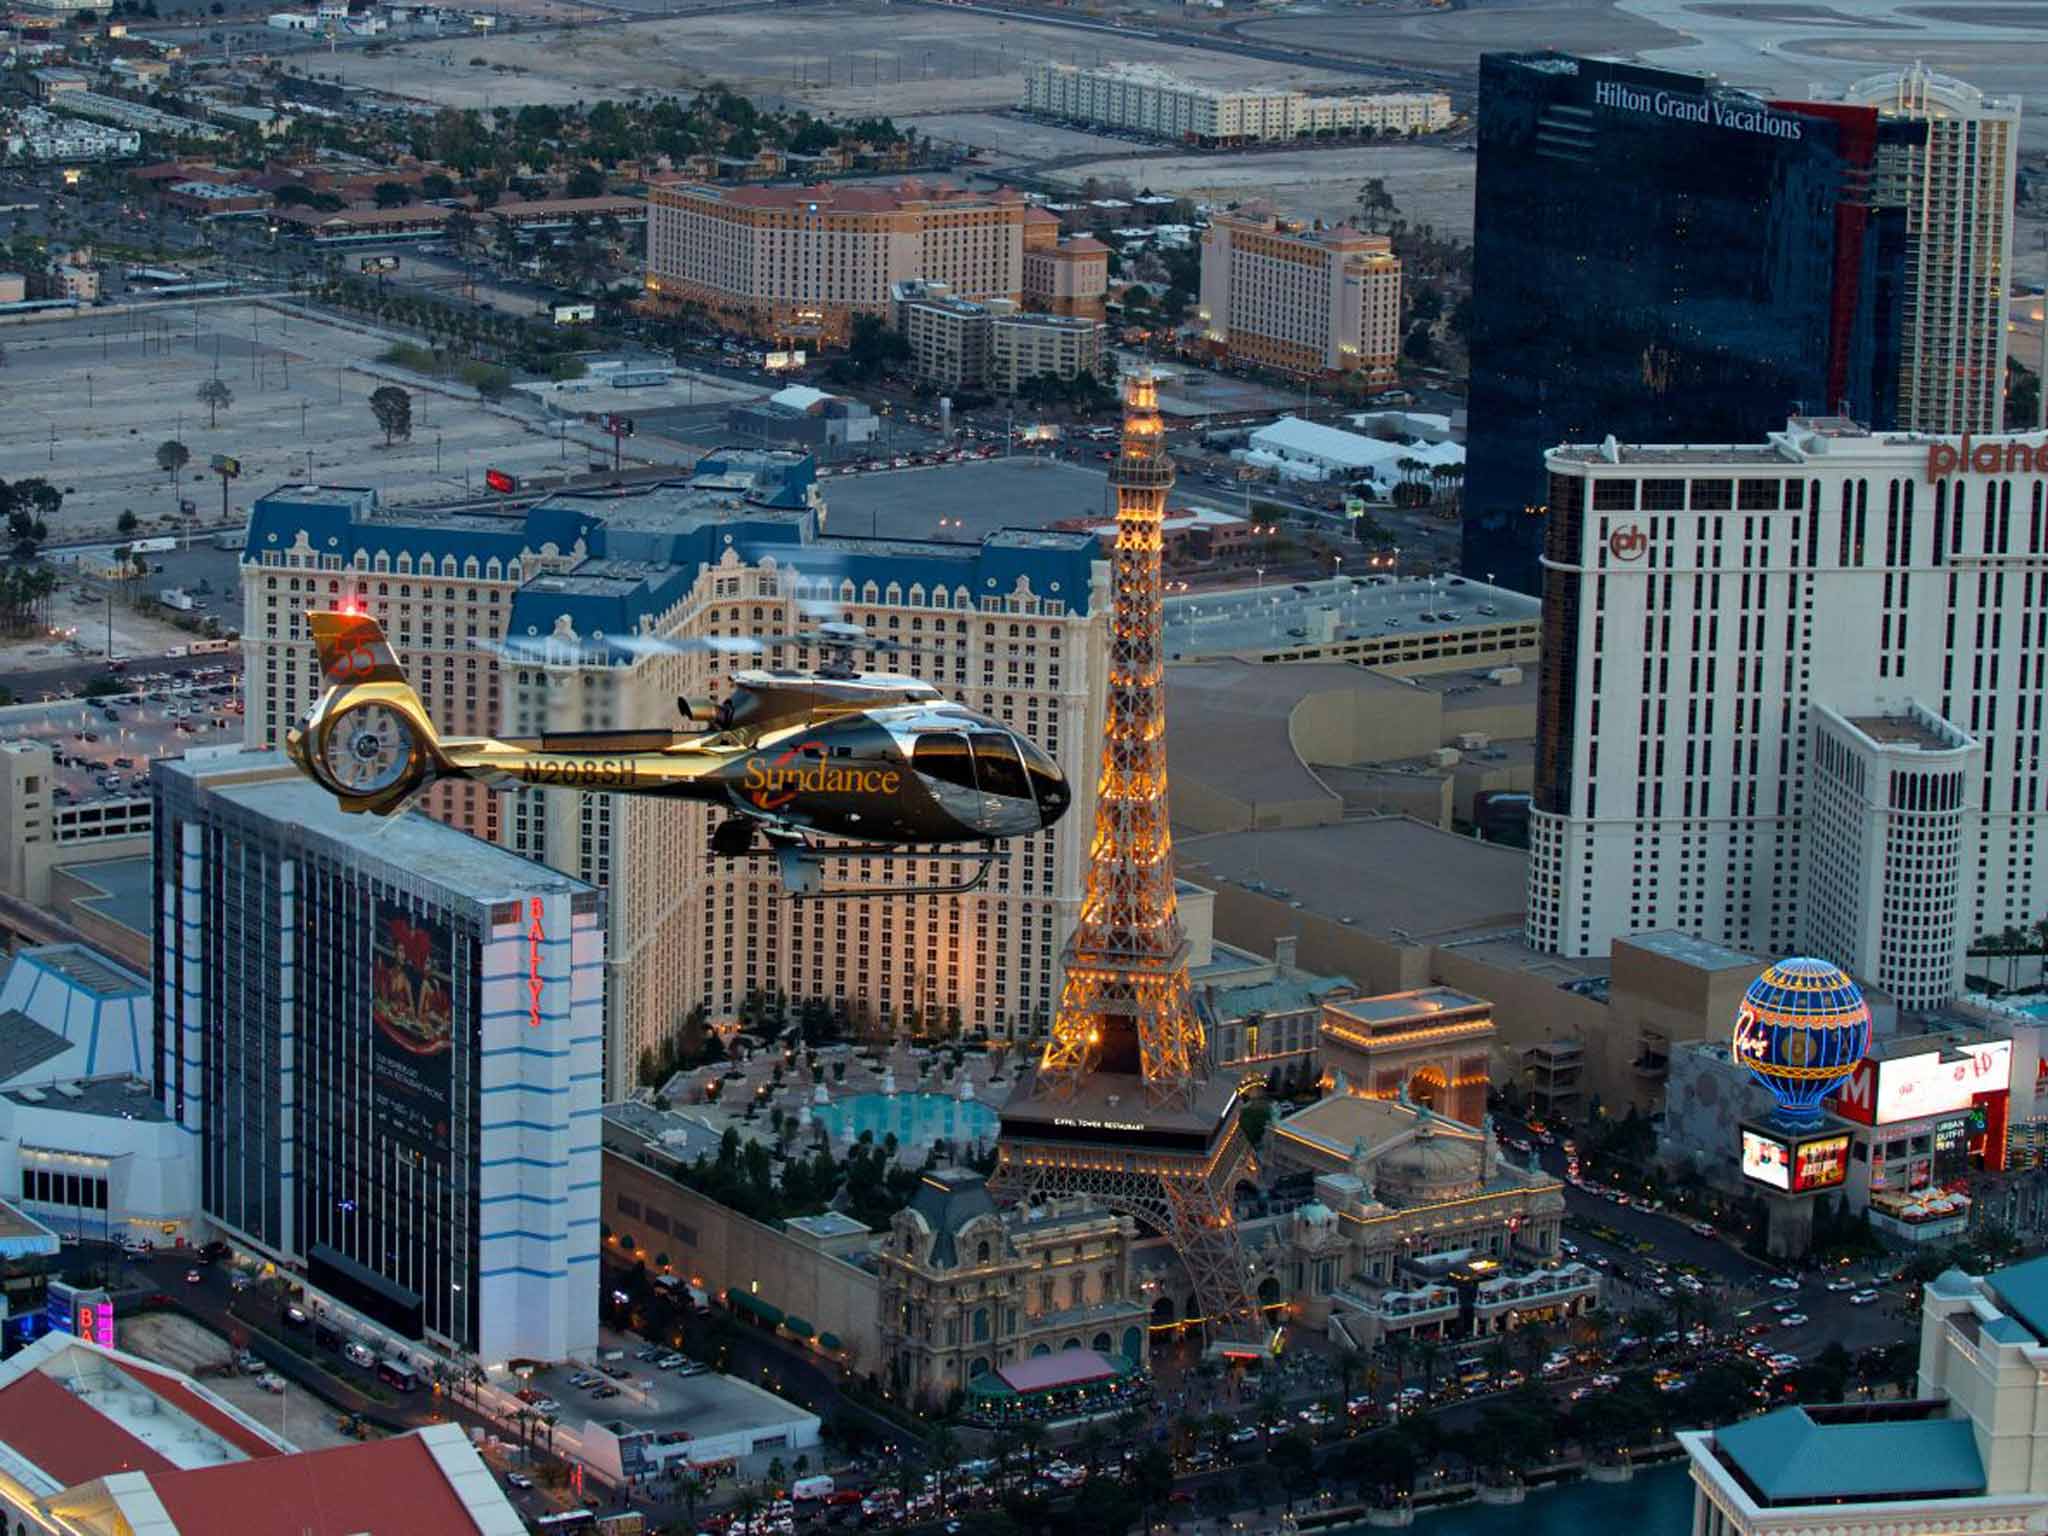 A helicopter tour of Las Vegas is a must